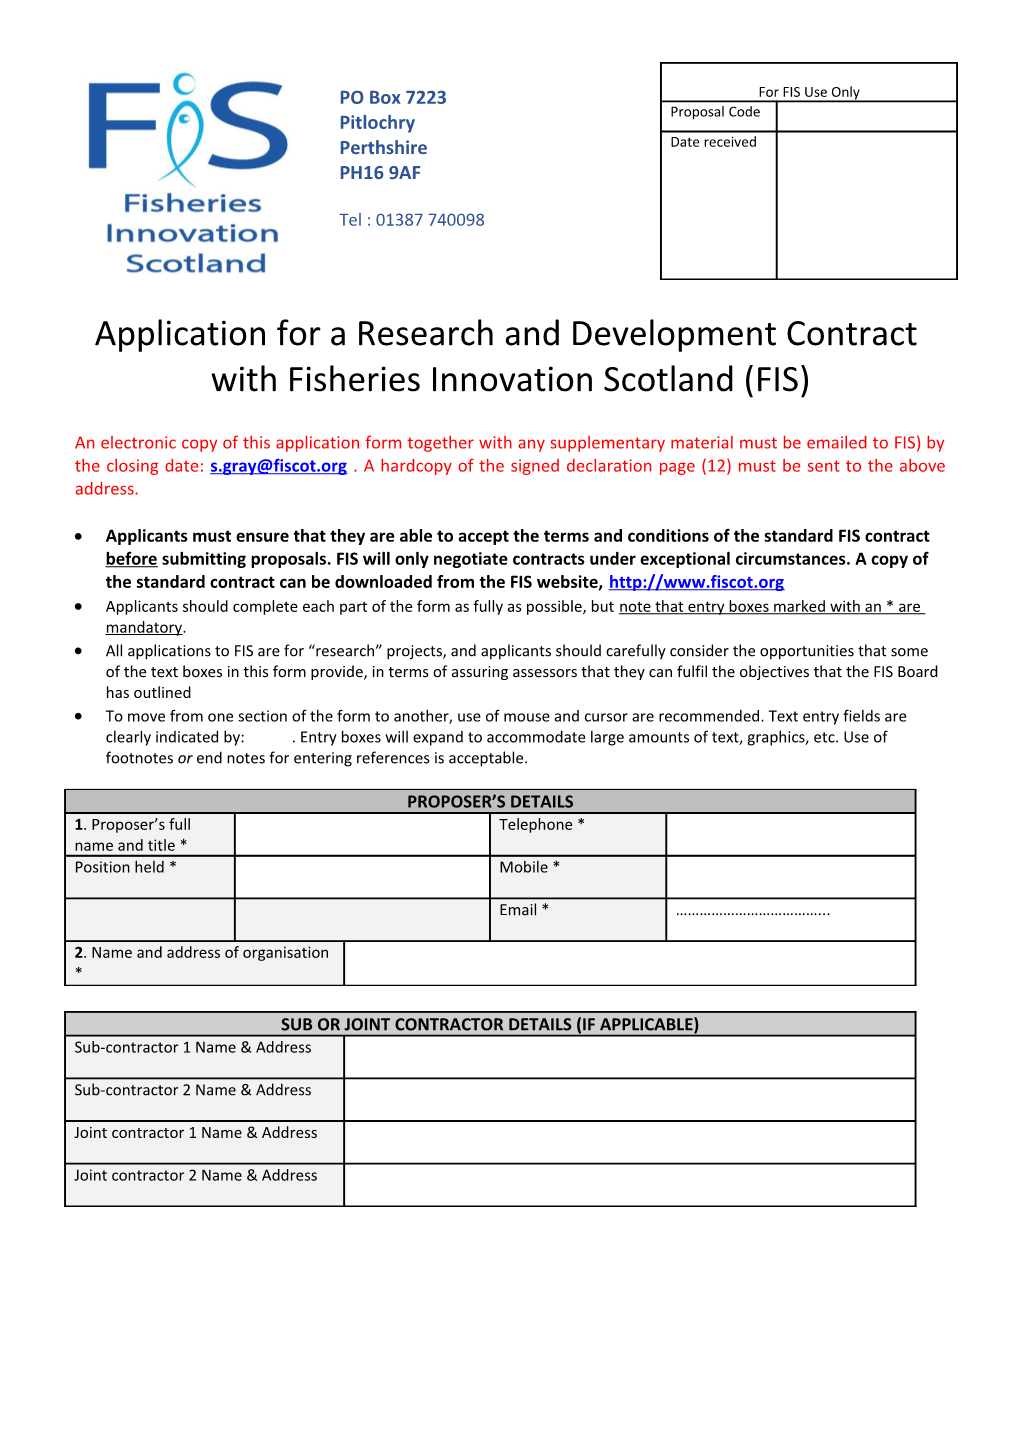 Application for a Research and Development Contract